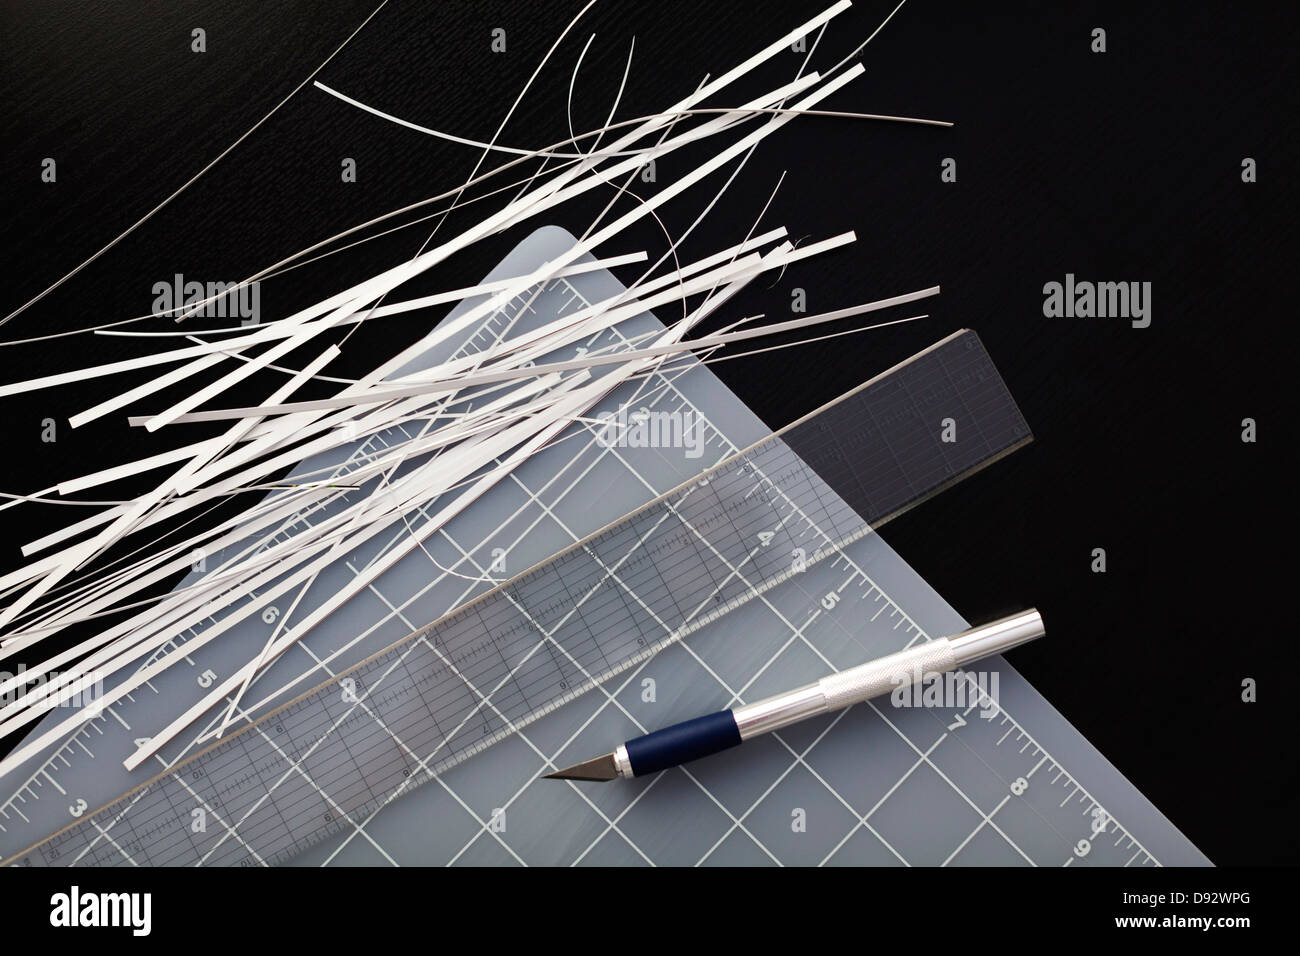 Corner of a cutting mat with shredded paper, ruler and utility knife on black background Stock Photo